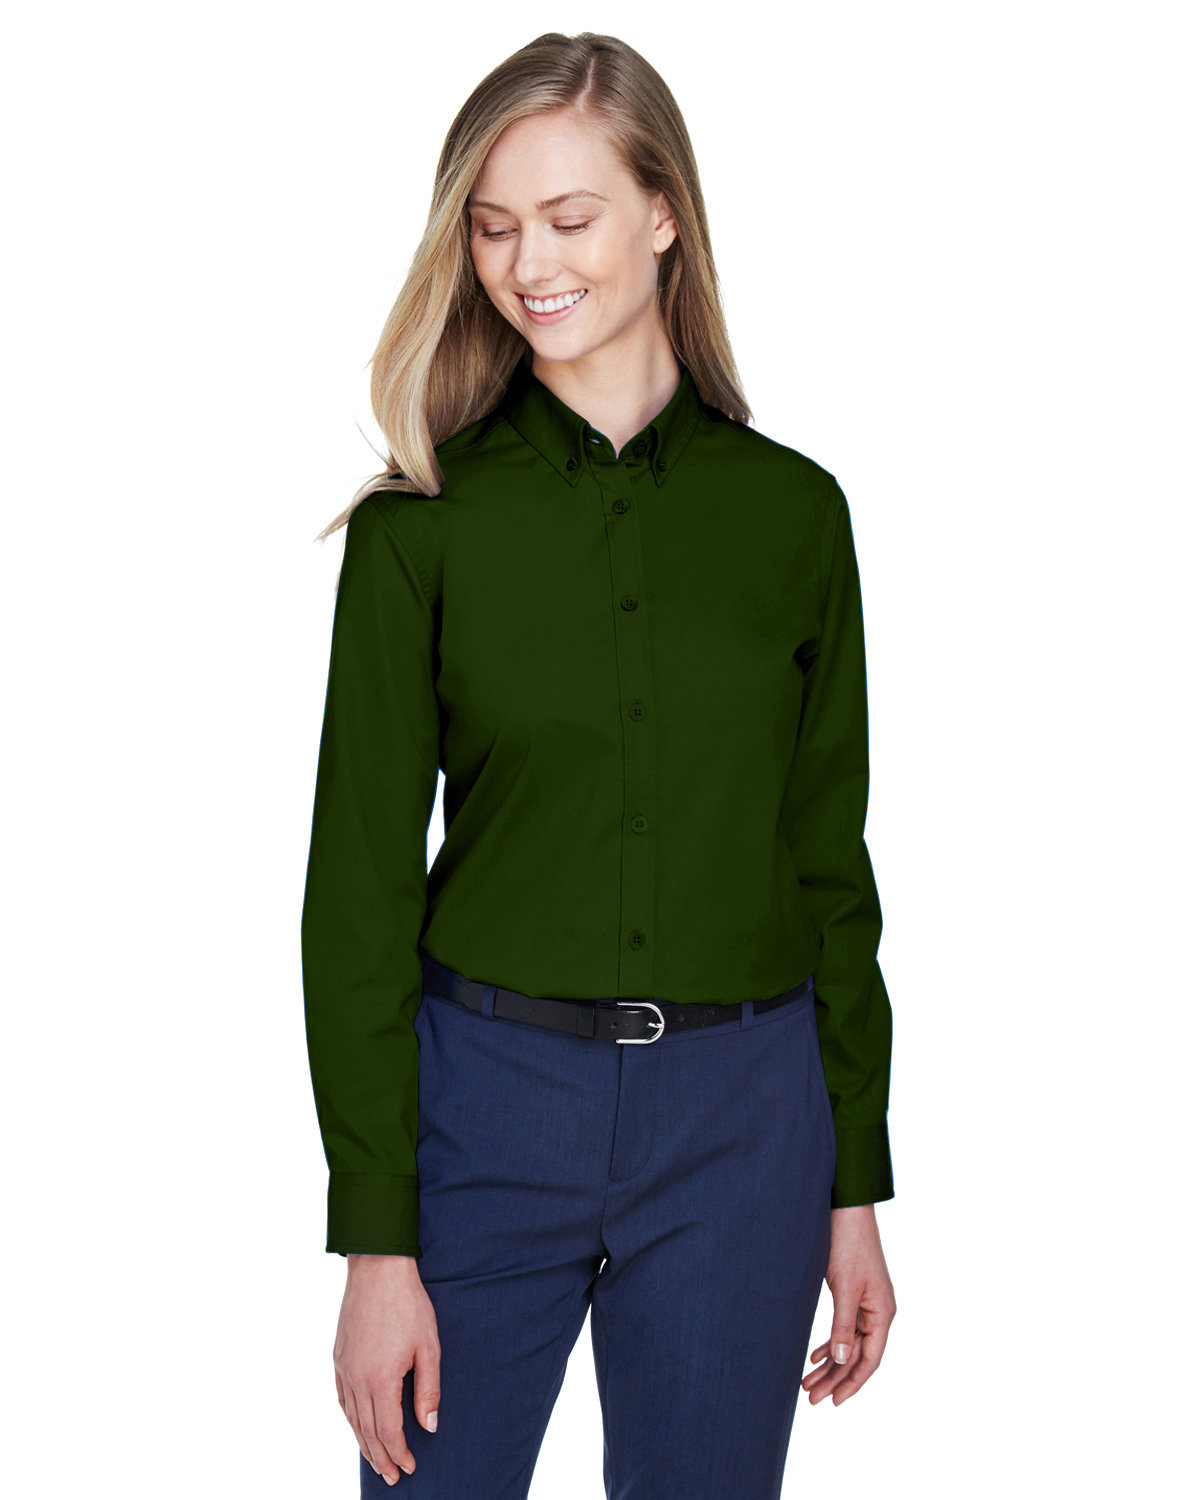 CORE365 Ladies' Operate Long-Sleeve Twill Shirt FOREST 